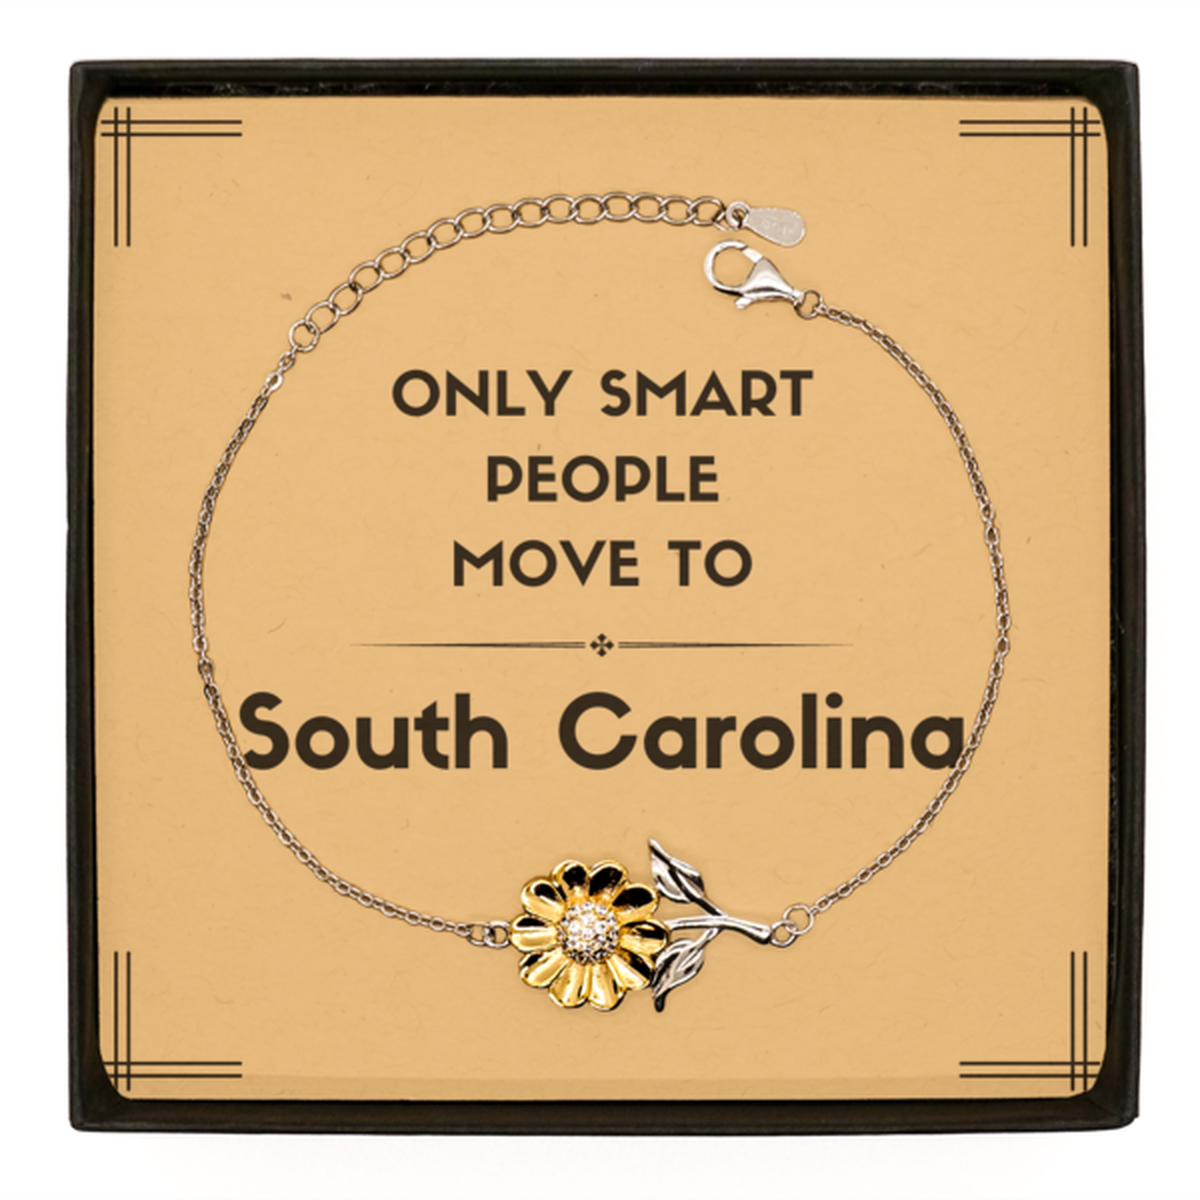 Only smart people move to South Carolina Sunflower Bracelet, Message Card Gifts For South Carolina, Move to South Carolina Gifts for Friends Coworker Funny Saying Quote